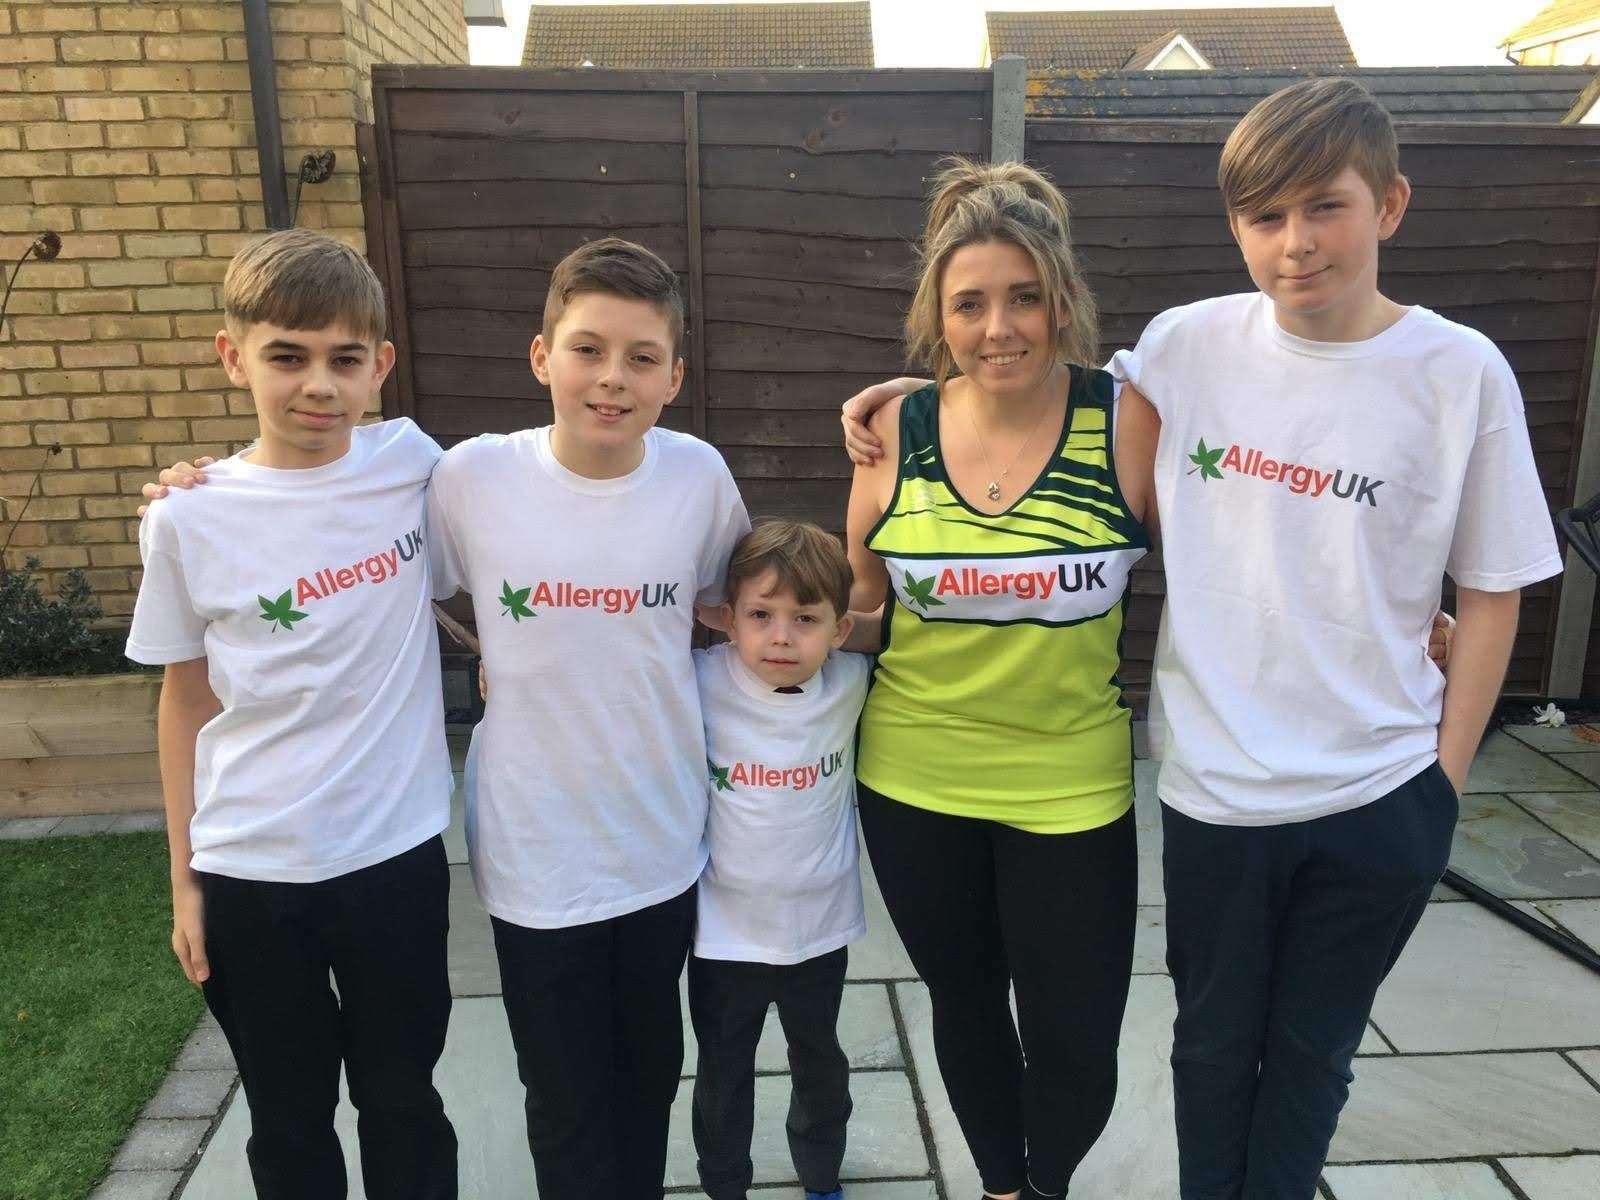 Richard 'Richie' Mills' support team, from the left, Dillon, Connor, Kodie, wife Liz and Callum. Richard is celebrating his 40th birthday by running a marathon along the Sheppey Way at Iwade in aid of Allergy UK for five-year-old Kodie